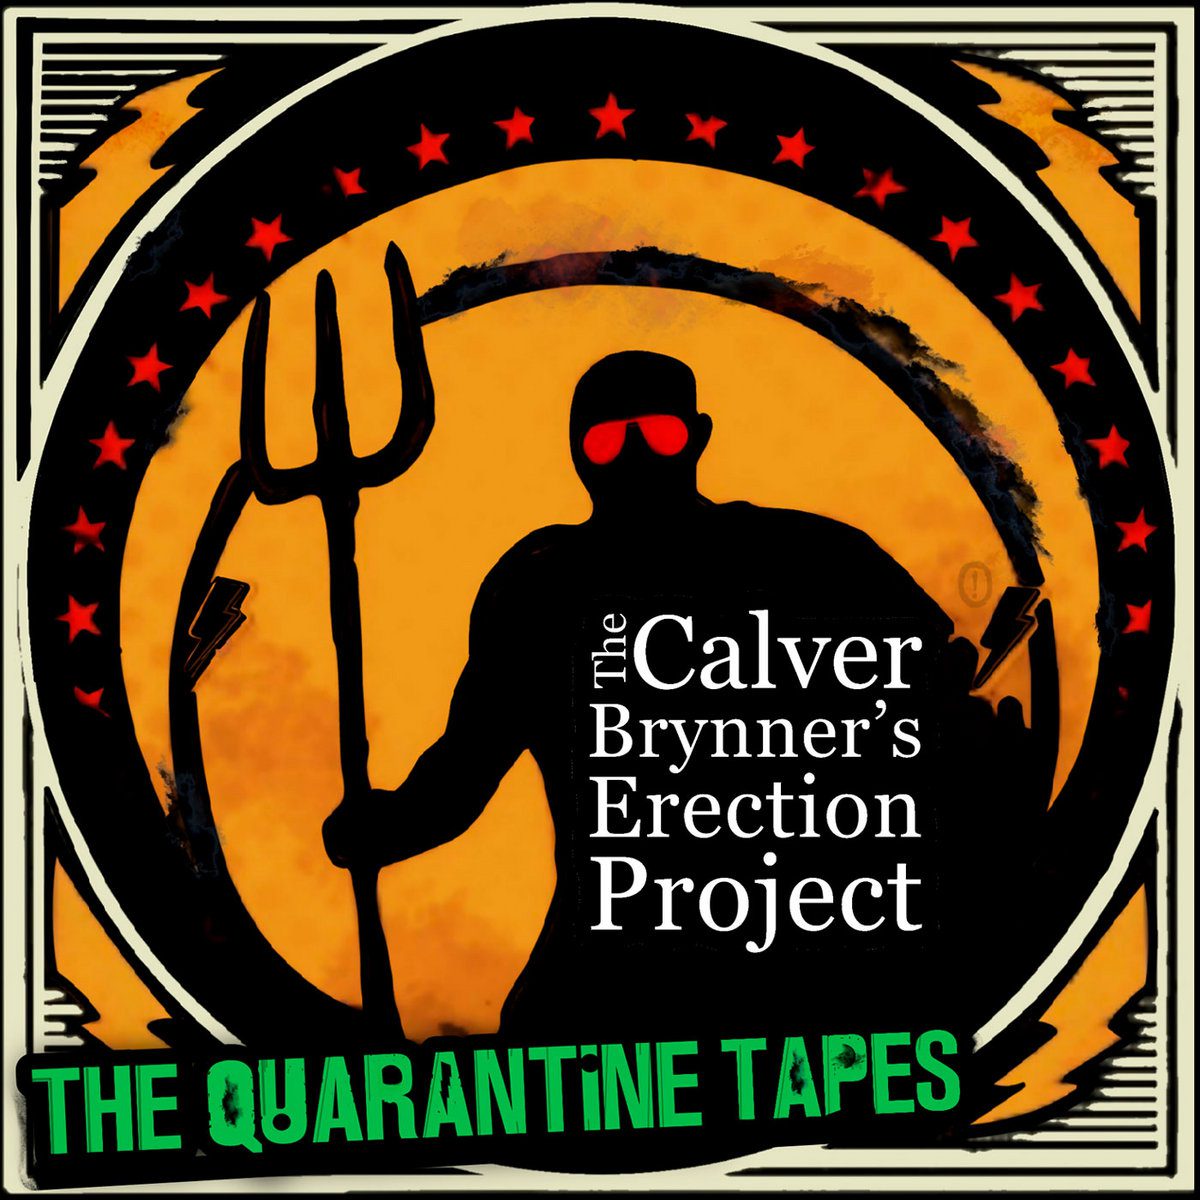 The Calver Brynner’s Erection Project – The Quarantine Tapes (2020)